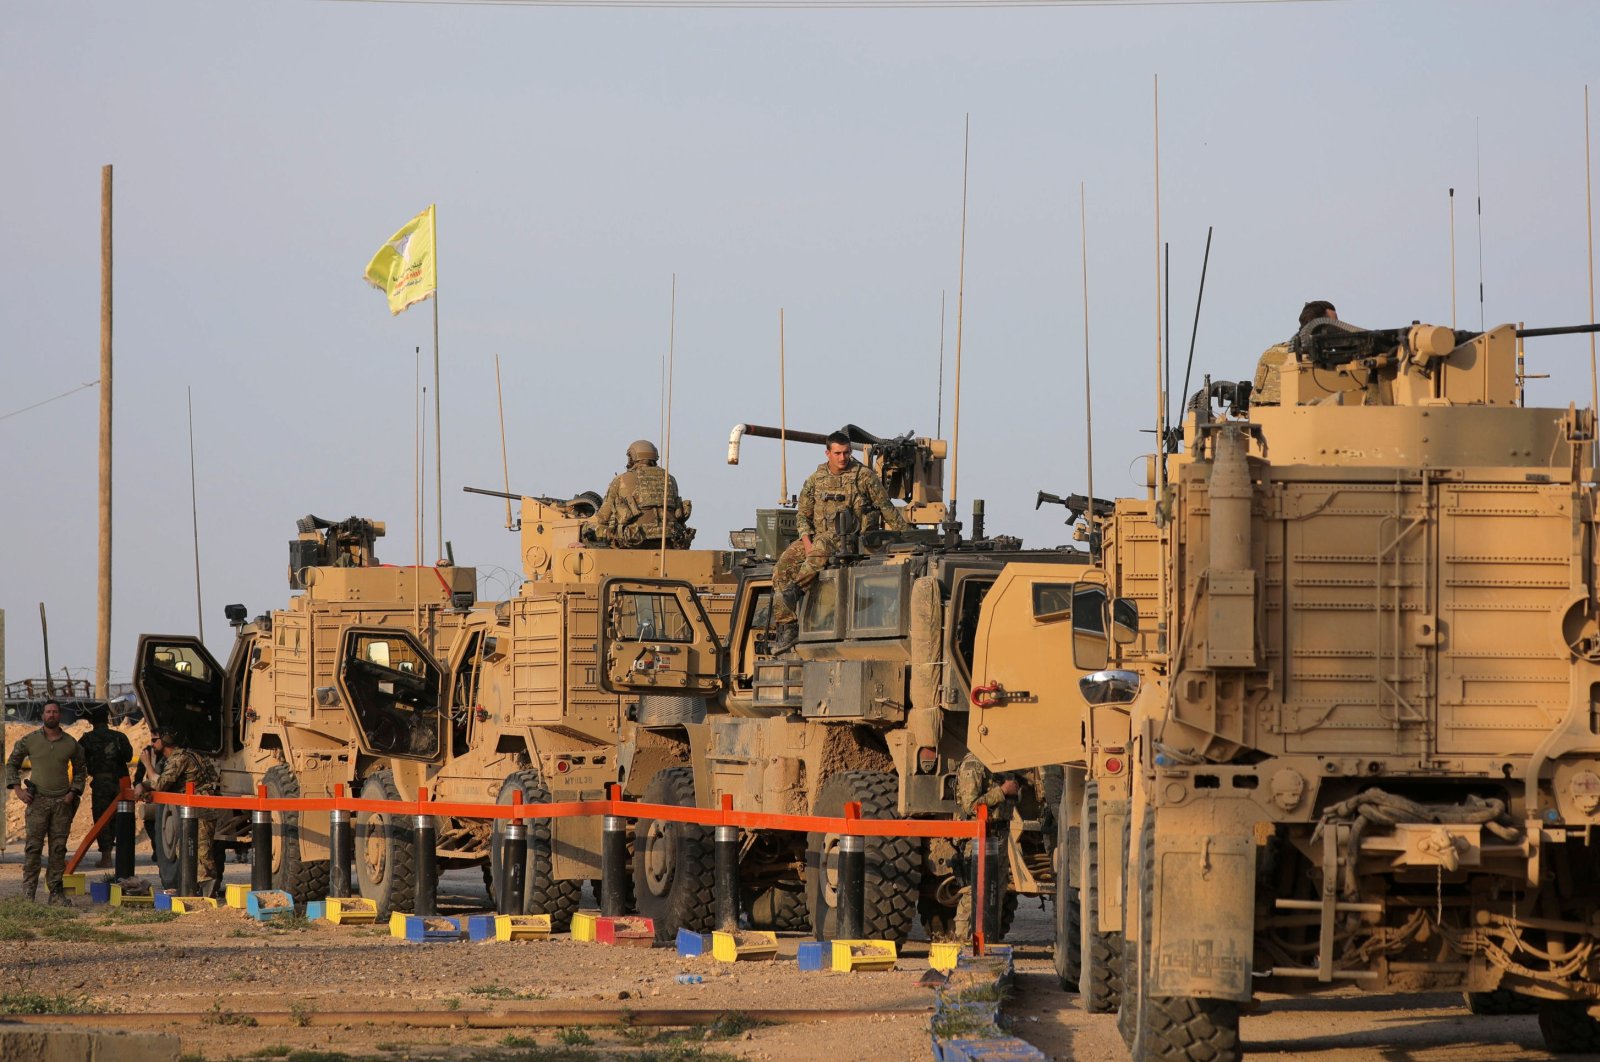 American soldiers stand near military trucks, at the al-Omar oil field in Deir el-Zour, Syria, March 23, 2019. (Reuters File Photo)